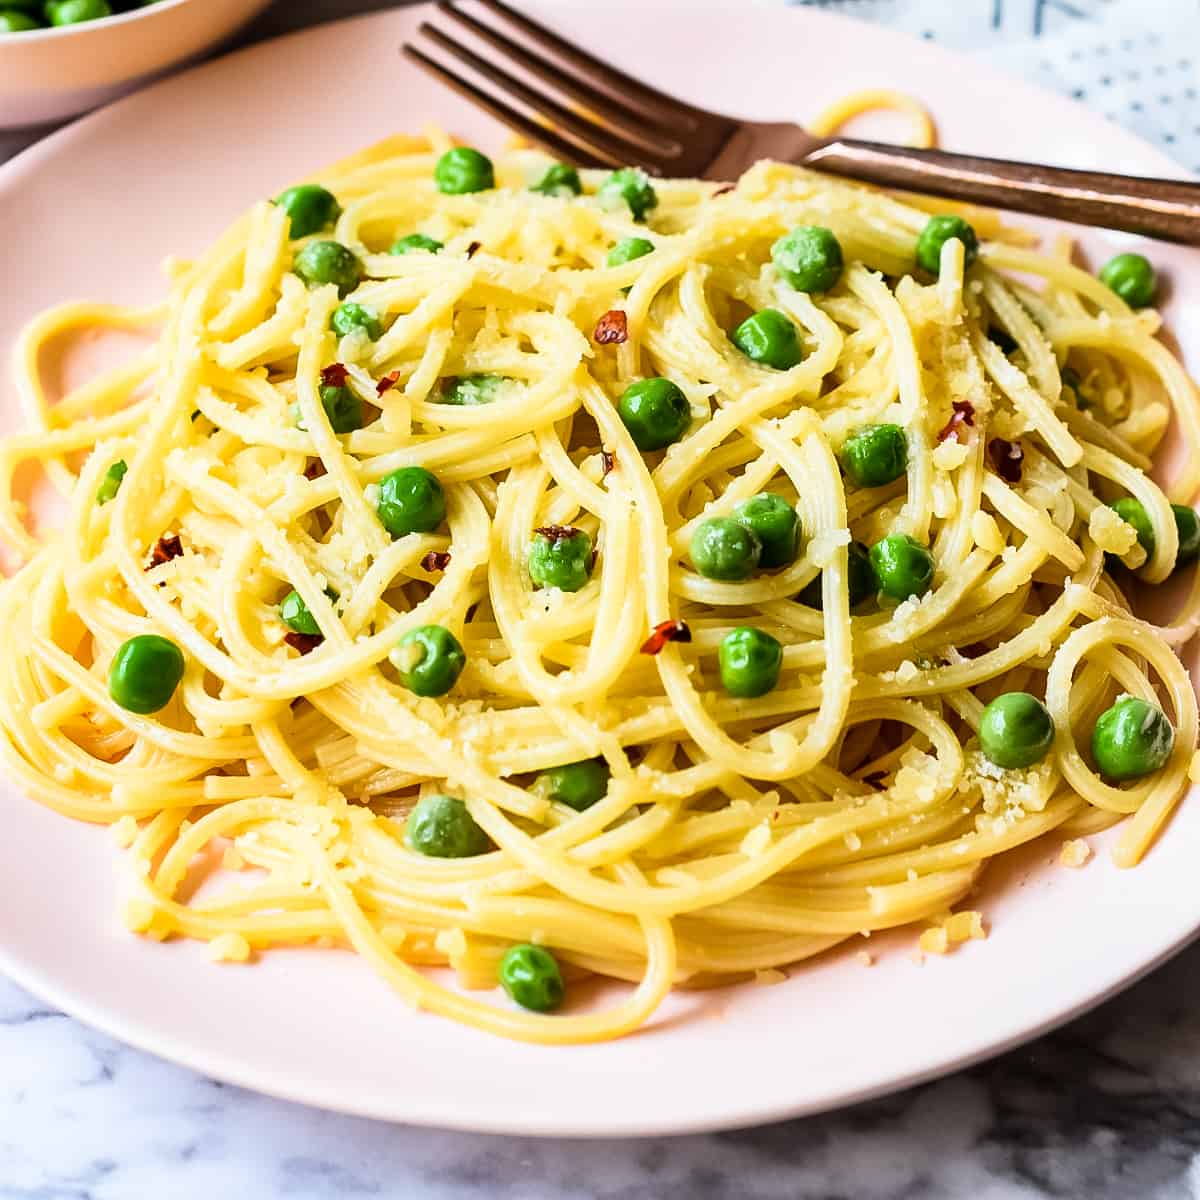 Cooked spaghetti with green peas, minced garlic, red peper flakes, and grated parmesan cheese on a pale pink dinner plate.